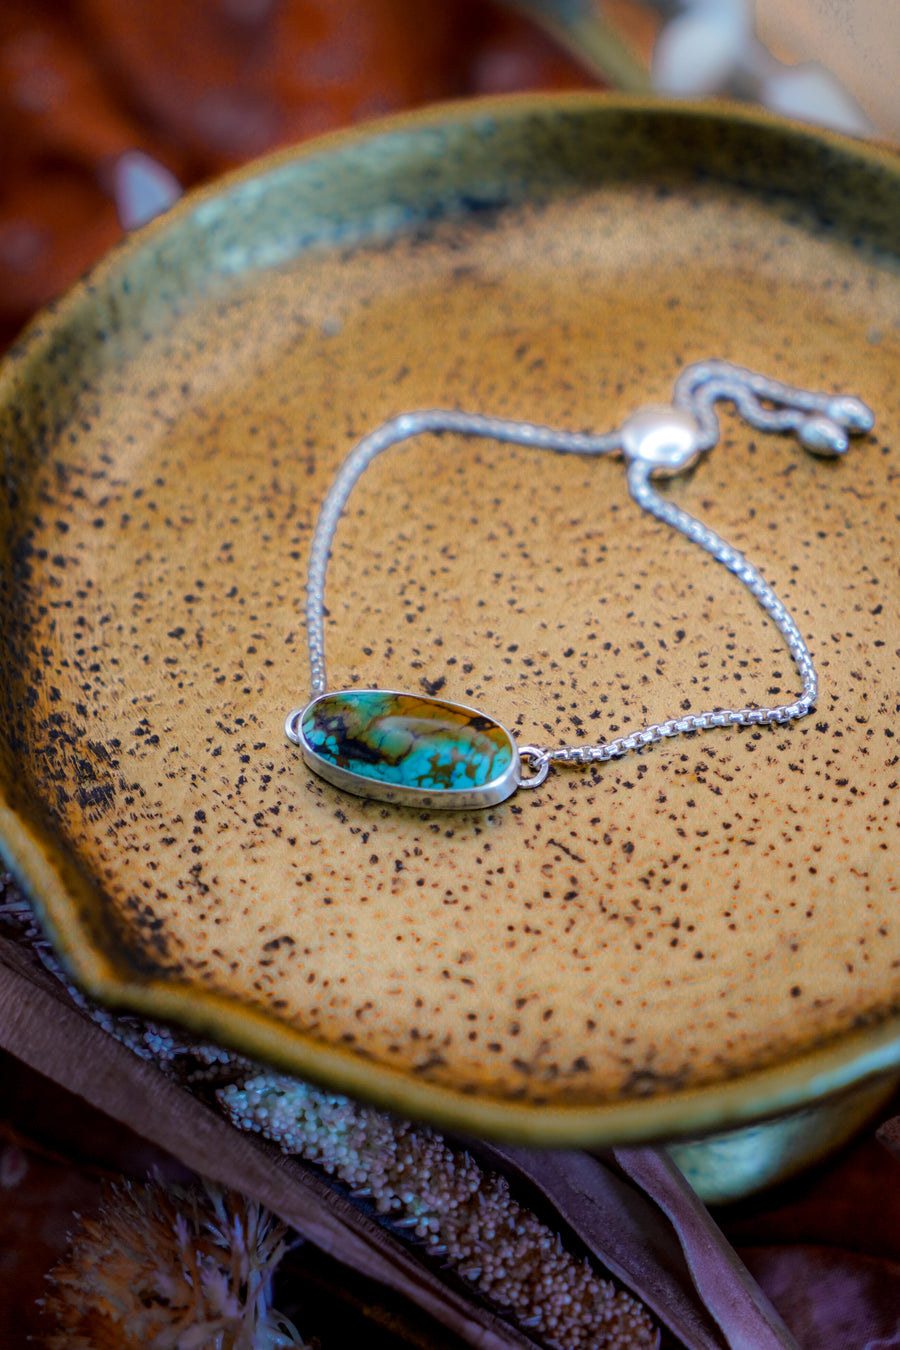 Out West Adjustable Bracelet in Hubei Turquoise